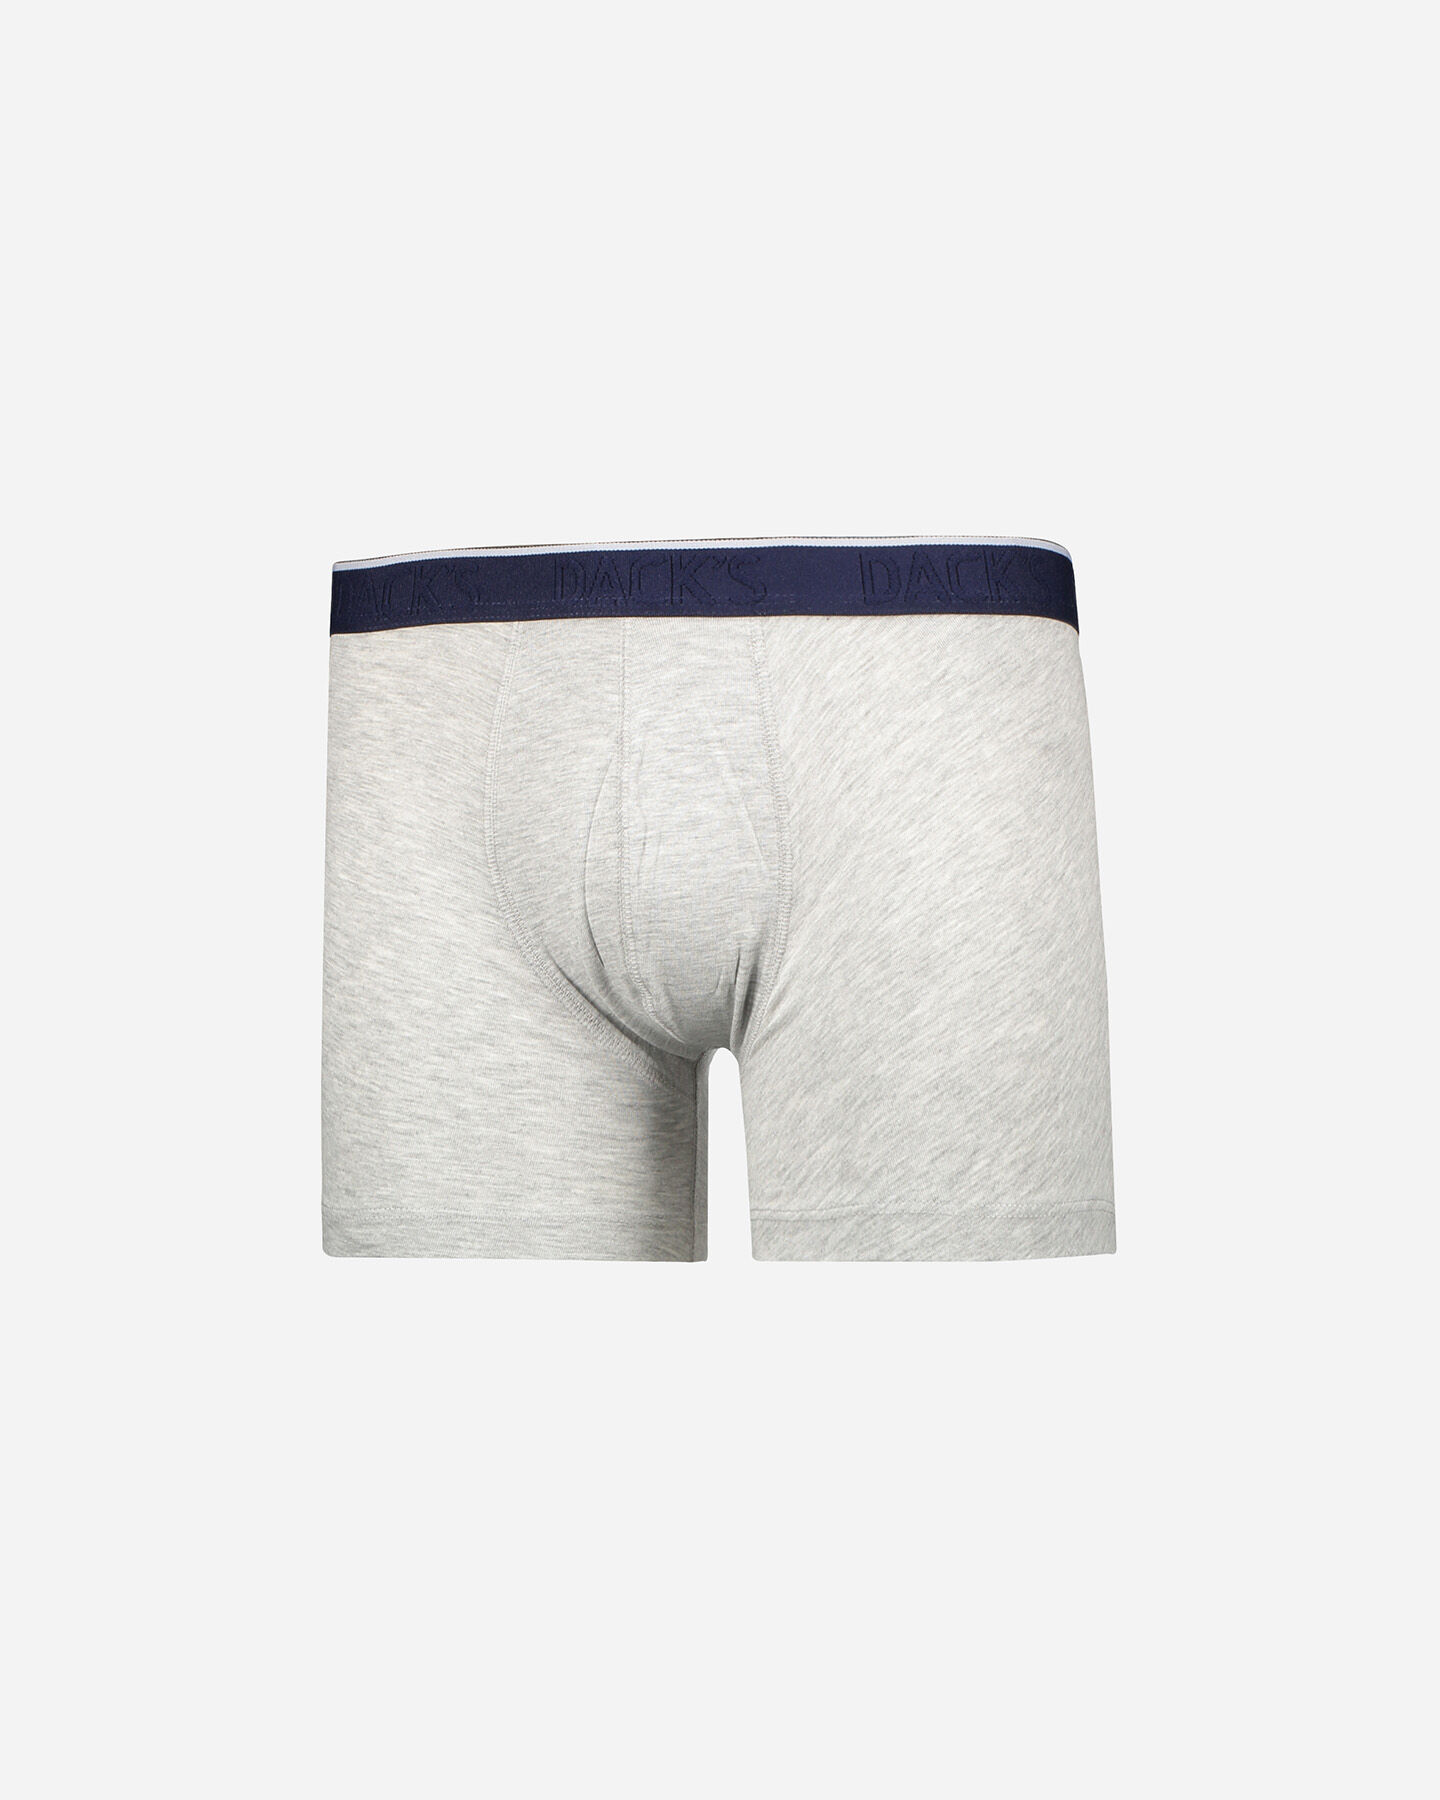  Intimo DACK'S BIPACK BASIC BOXER M S4061965|519/GM01|S scatto 1